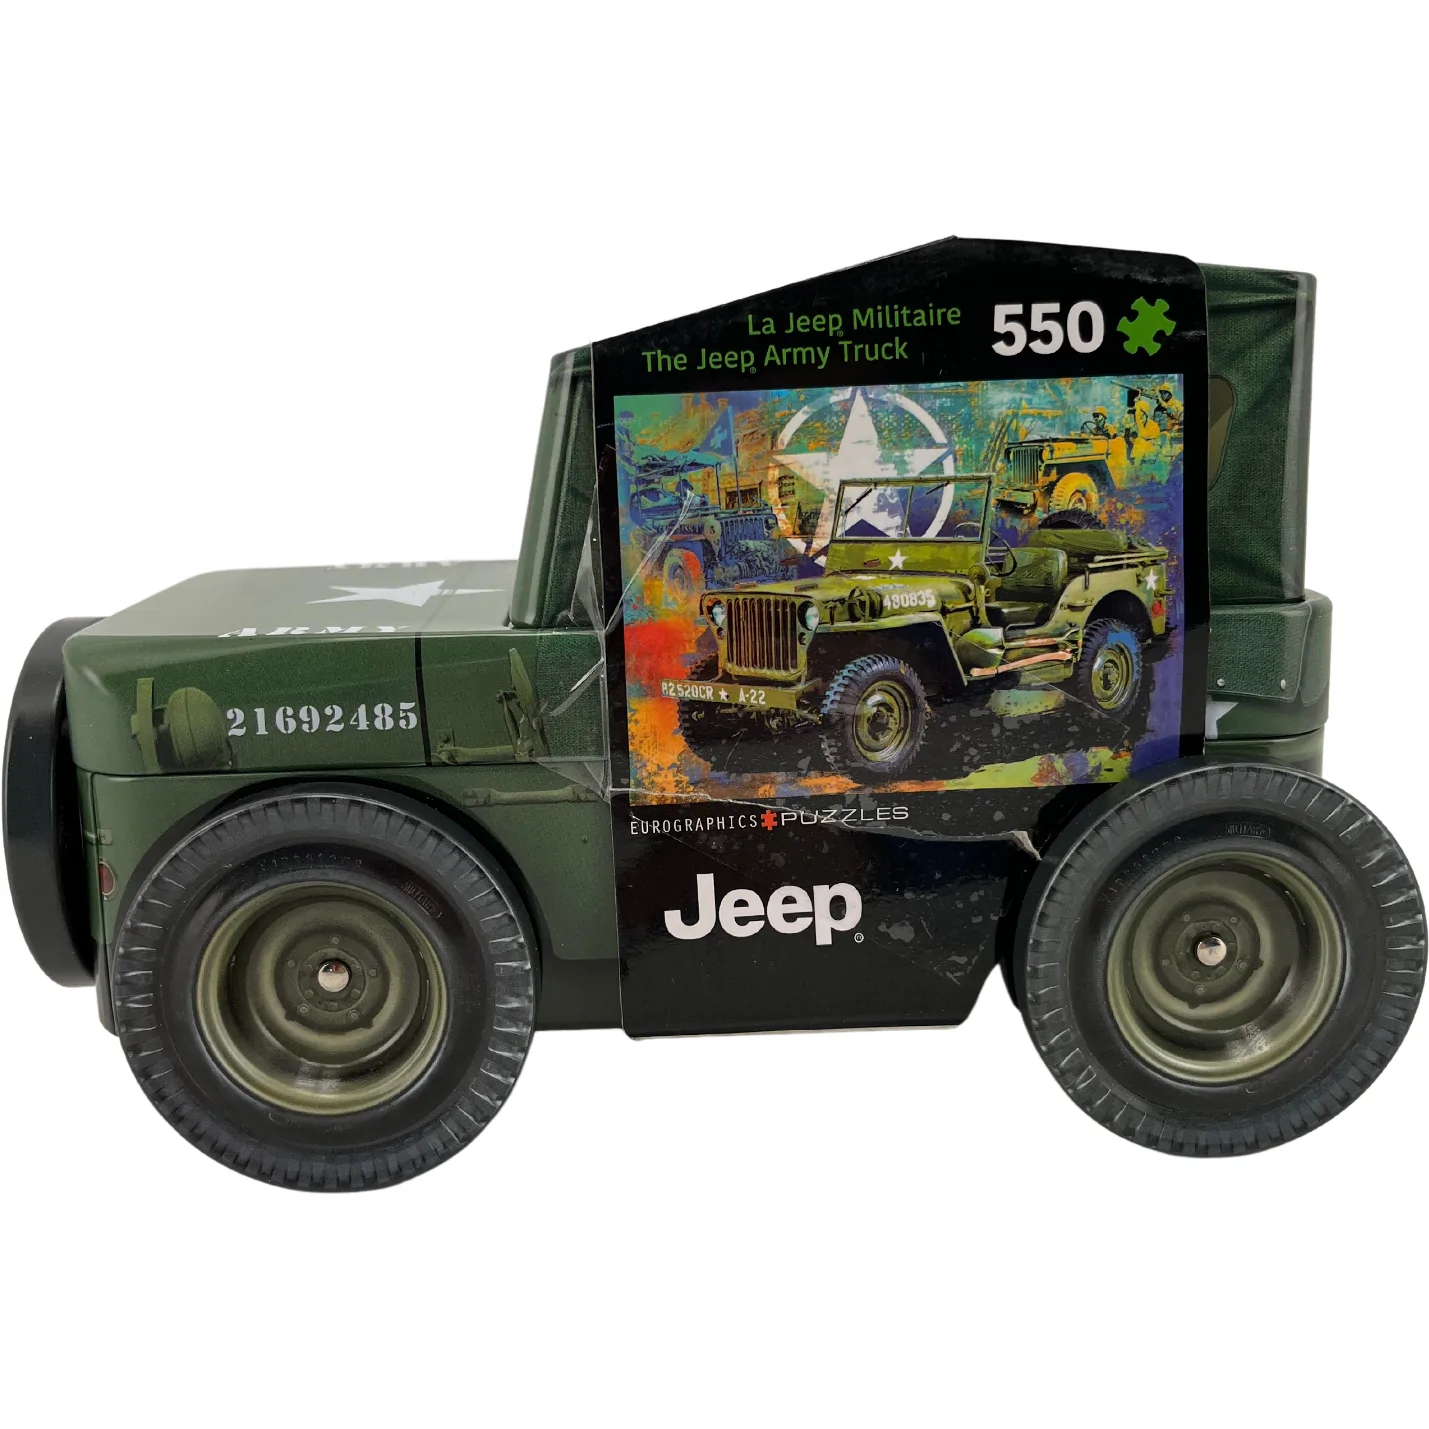 Eurographics Army Jeep Puzzle: 550 Piece Puzzle / The Jeep Army Truck